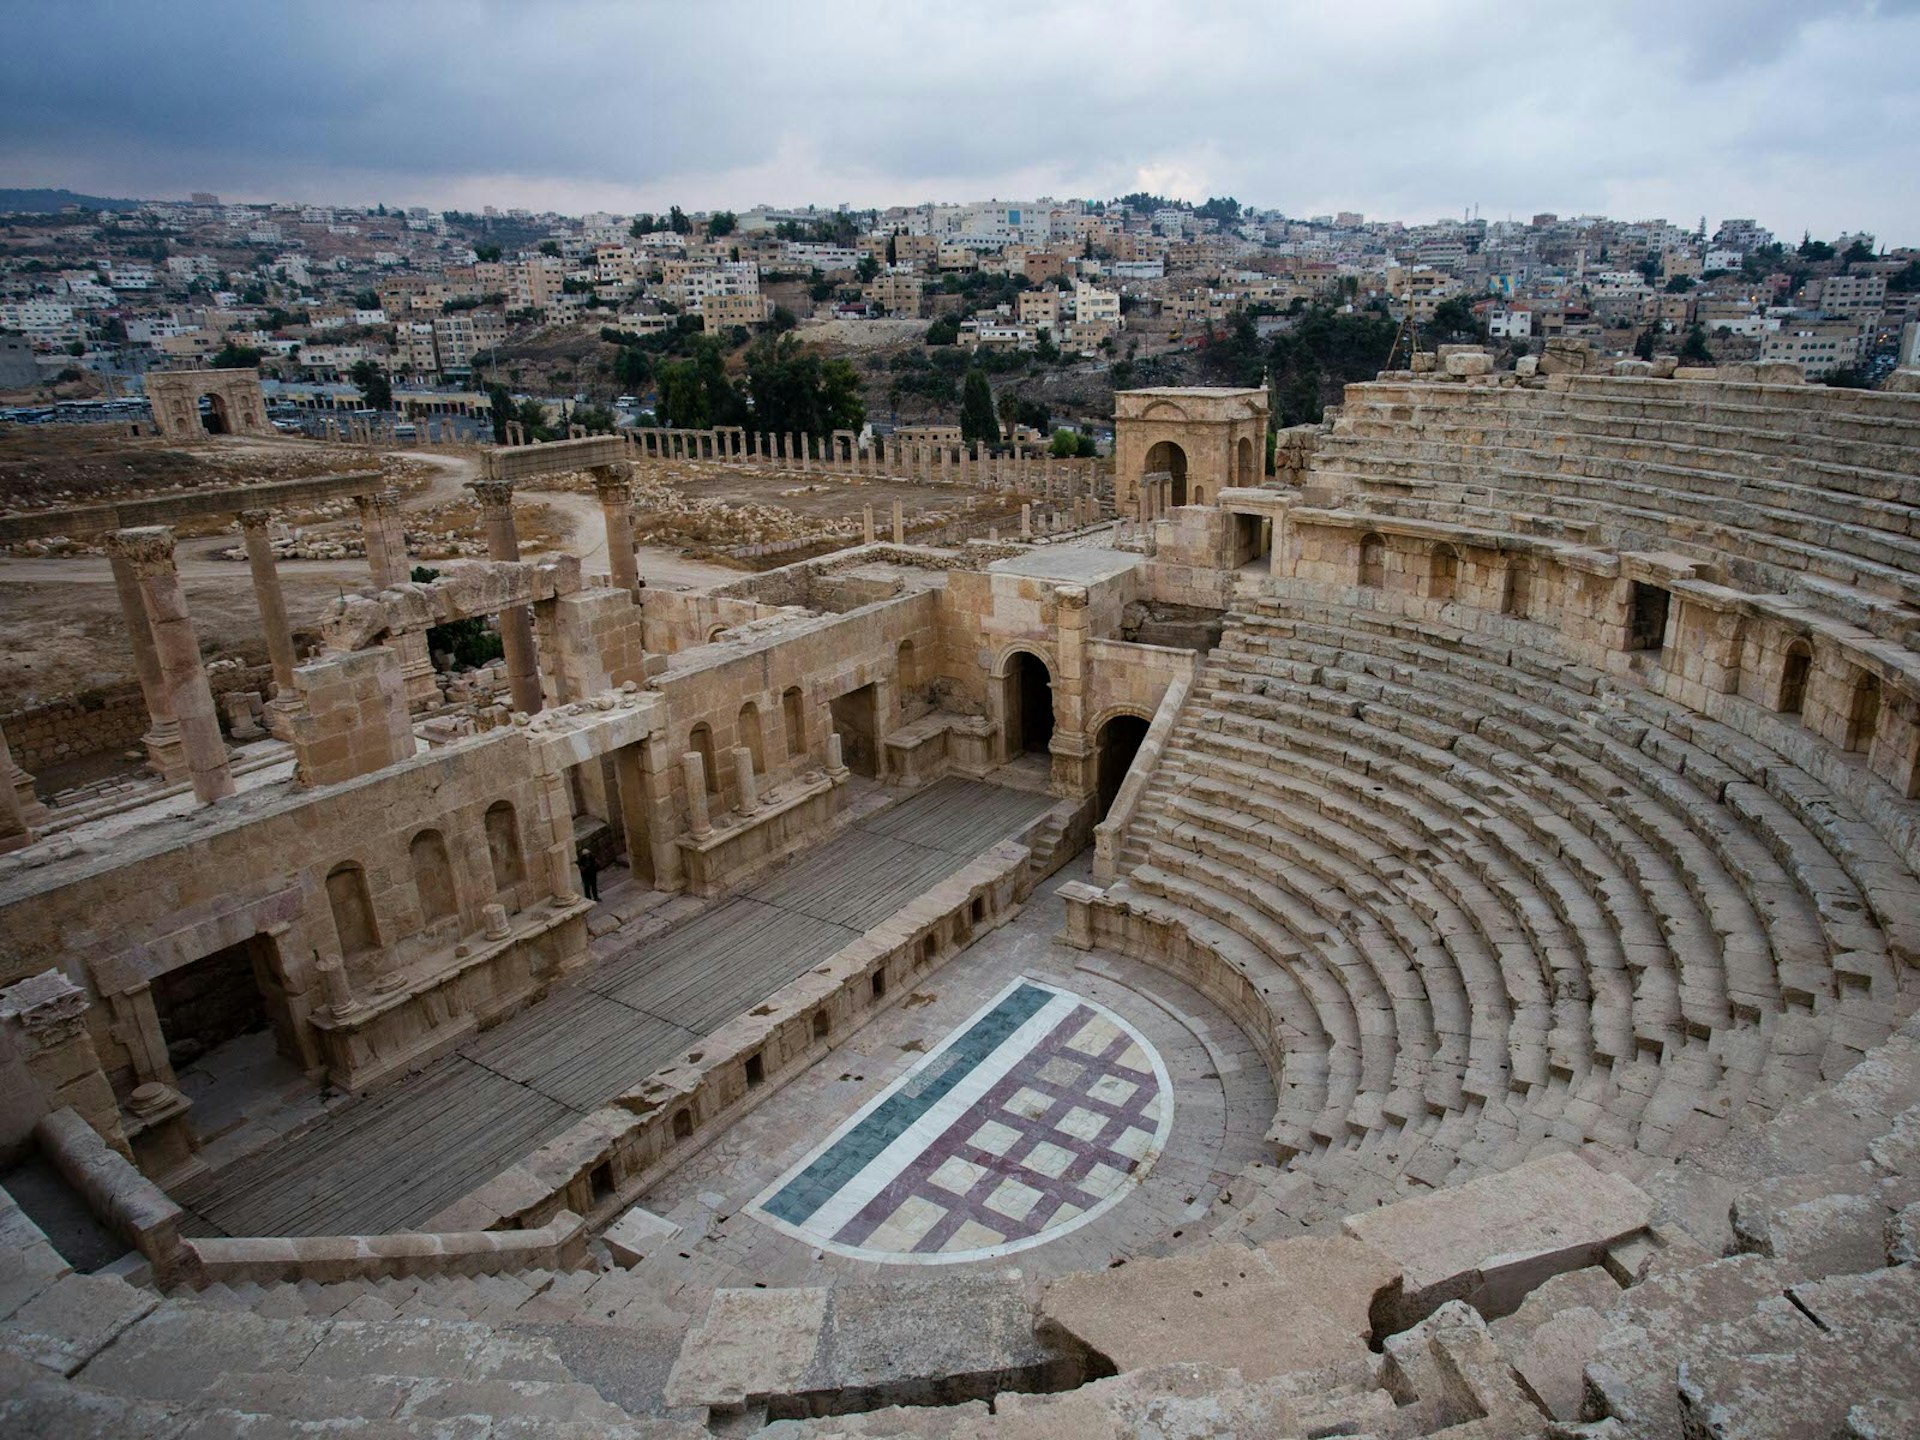 Hippodrome amphitheatre in the ruined city of Jerash, Jordan © Stephen Lioy / Lonely Planet